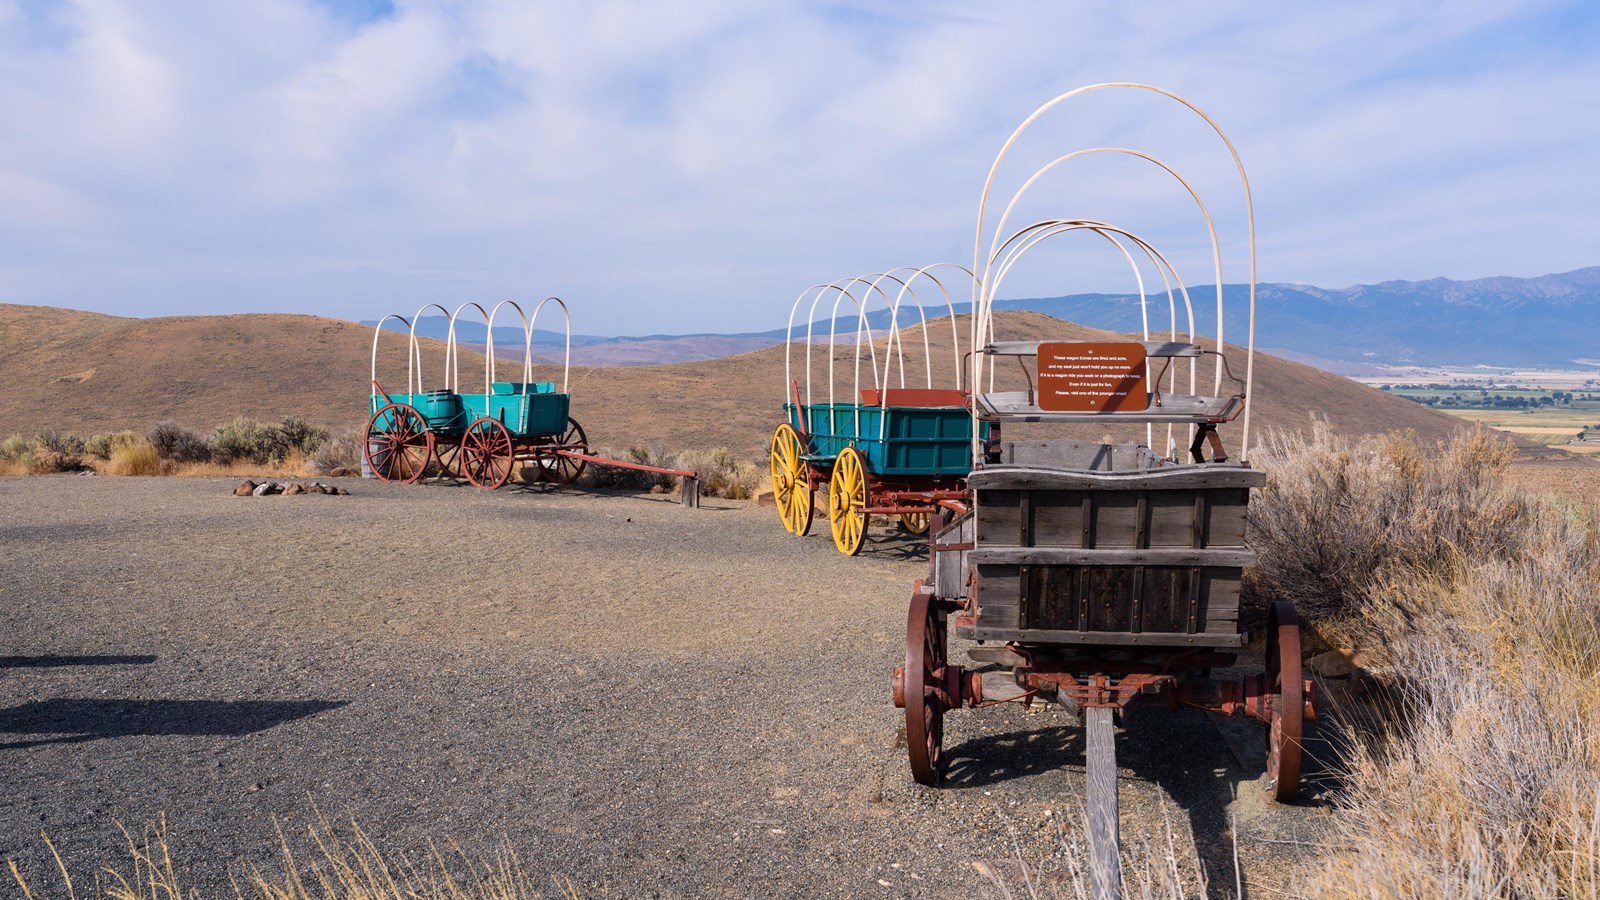 Wooden wagons sit uncovered in a desert setting.